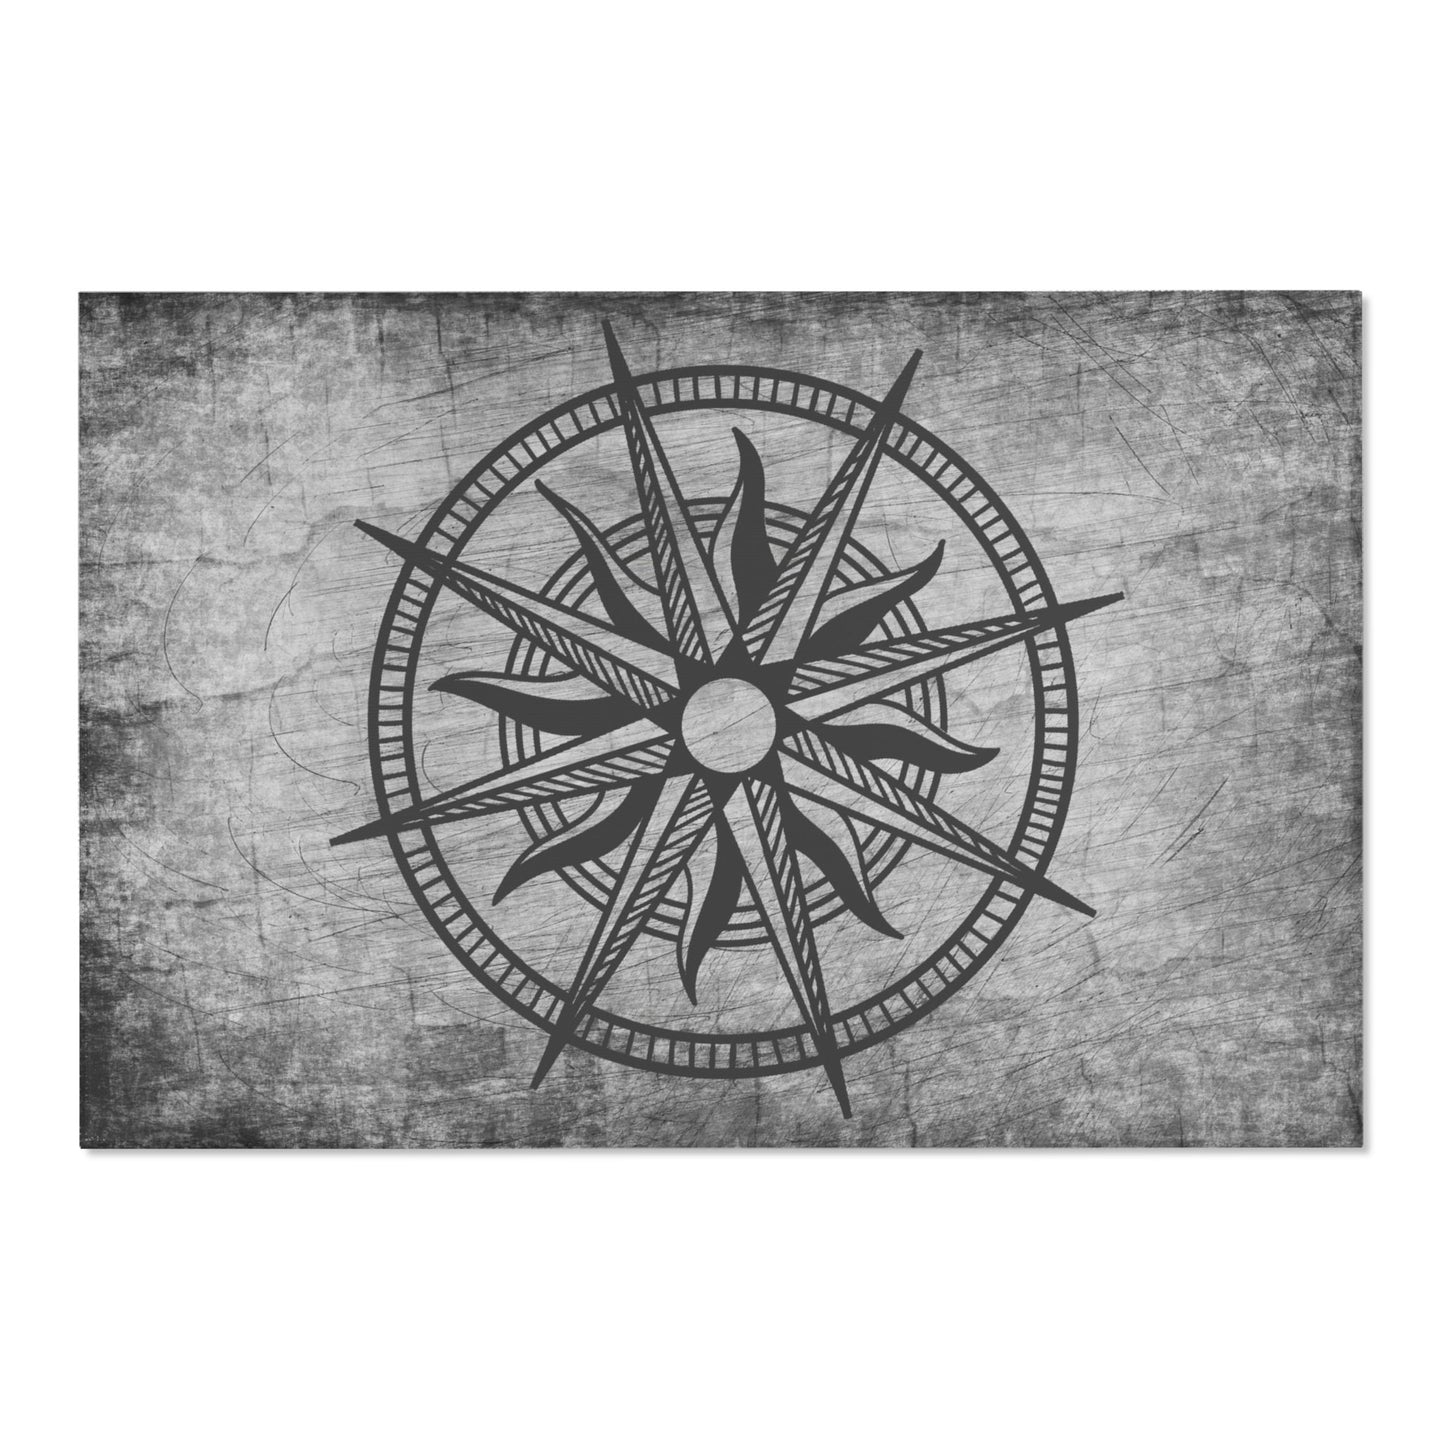 Compass Rug nautical gray grunge rug compasses floor mat large small marine ocean boat boating